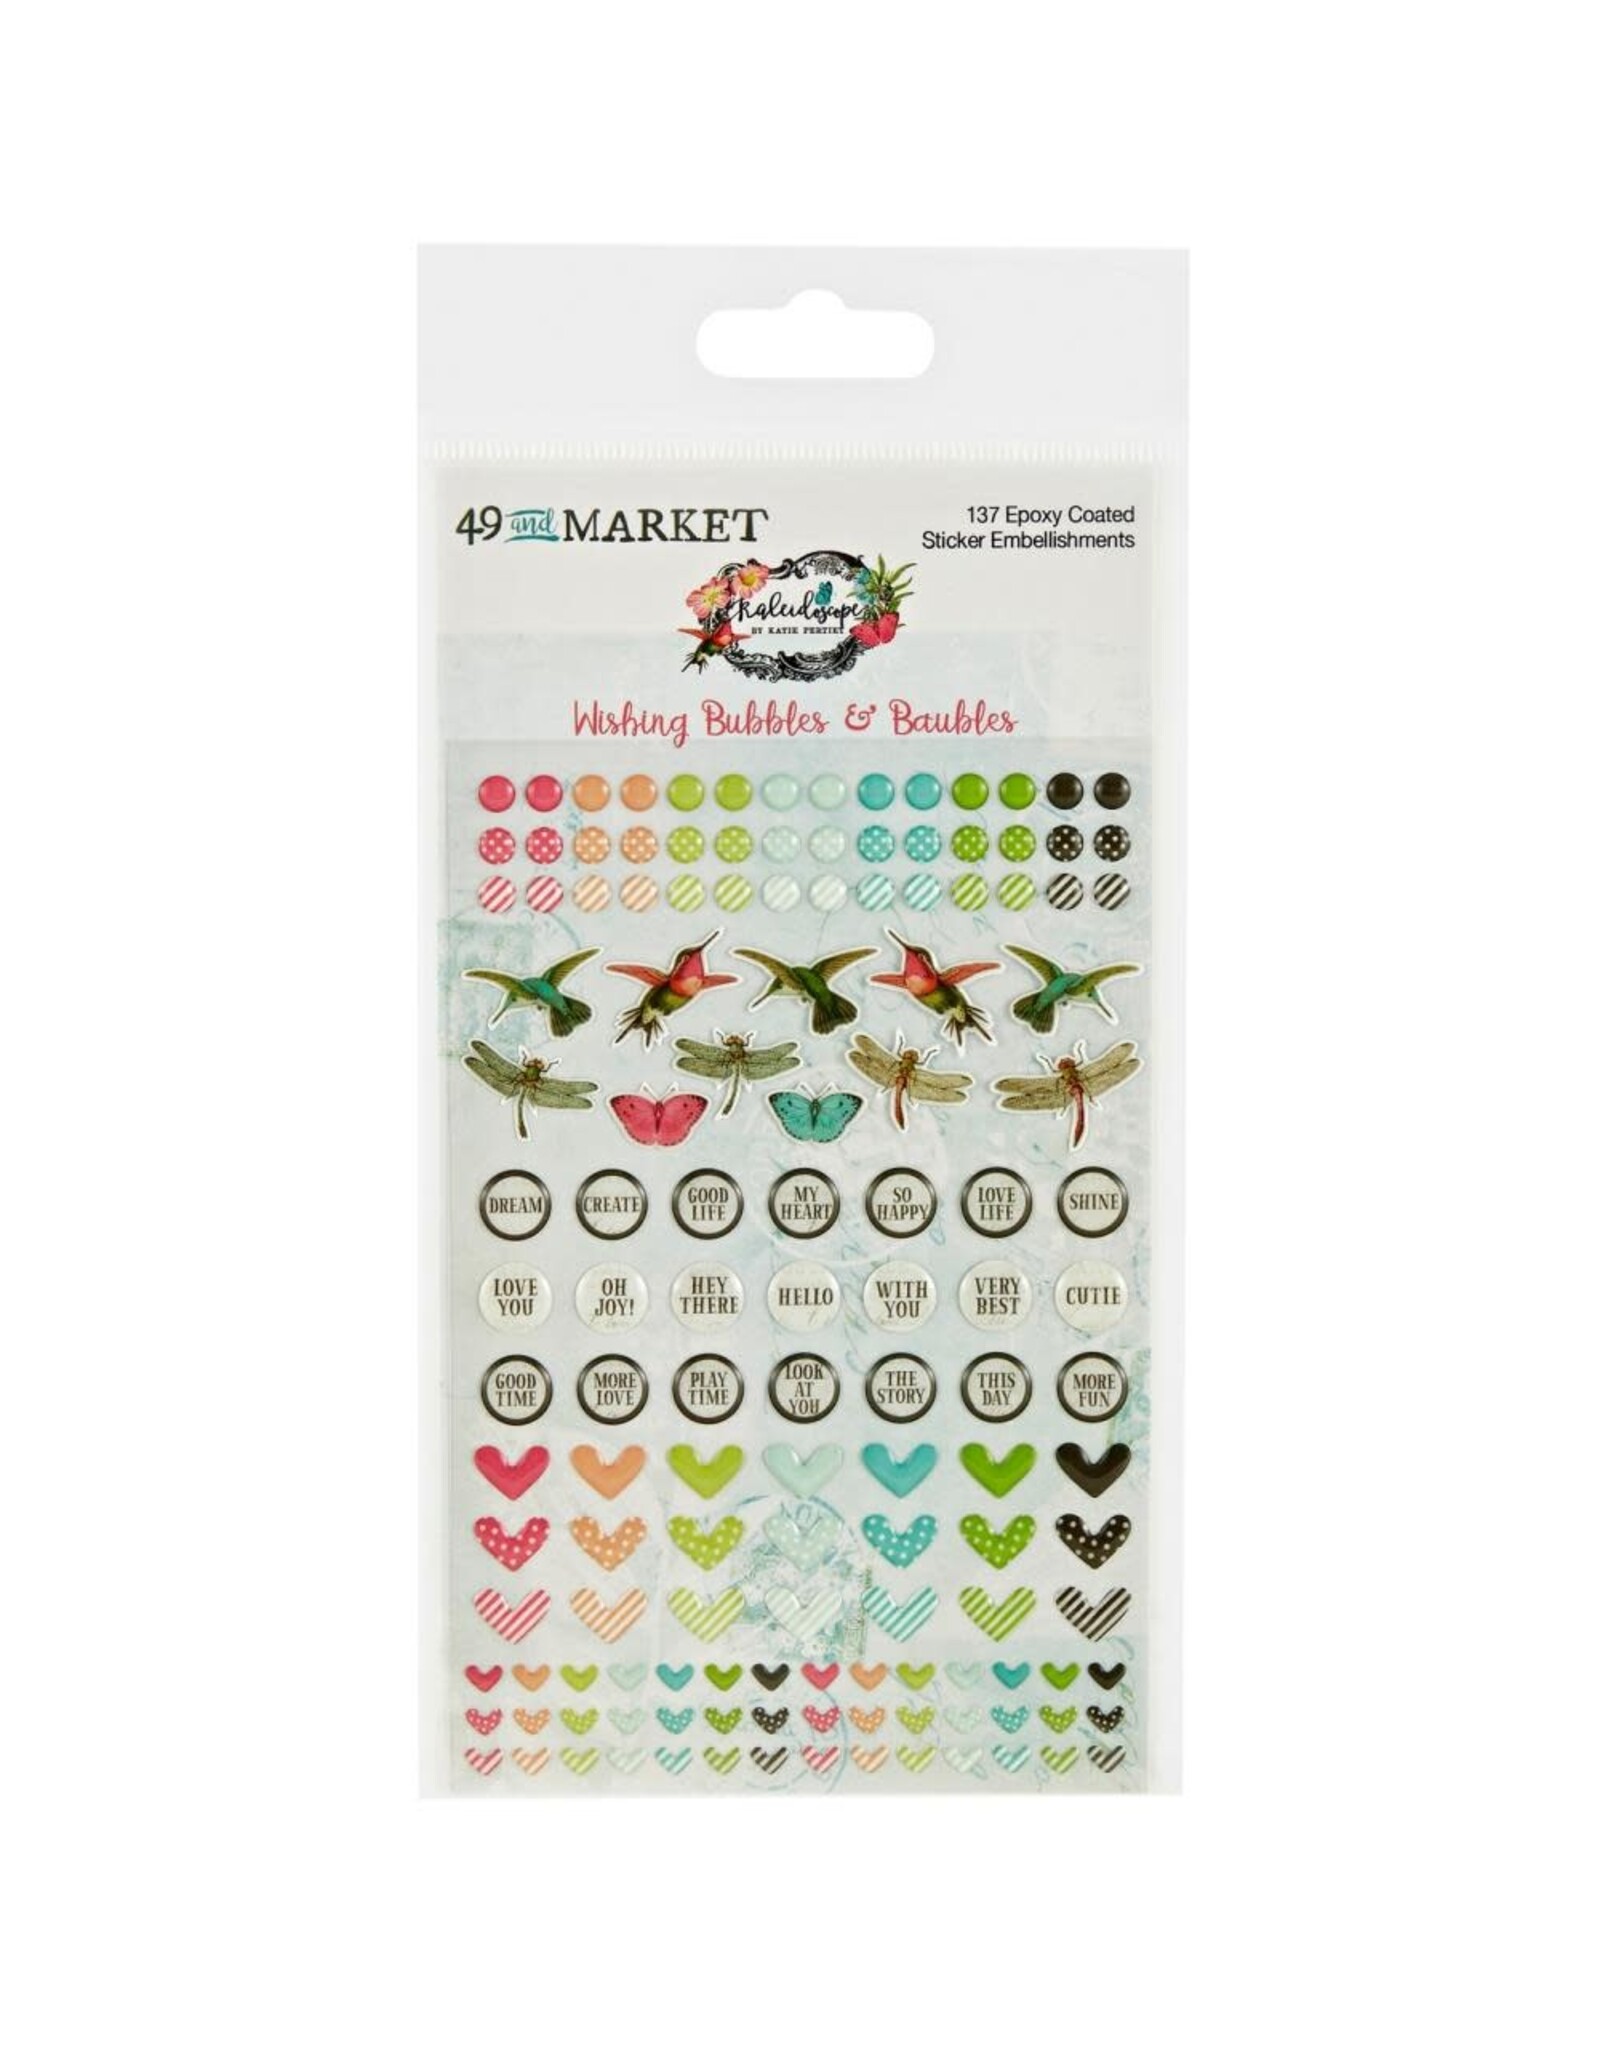 49 AND MARKET Kaleidoscope Wishing Bubbles & Baubles Stickers